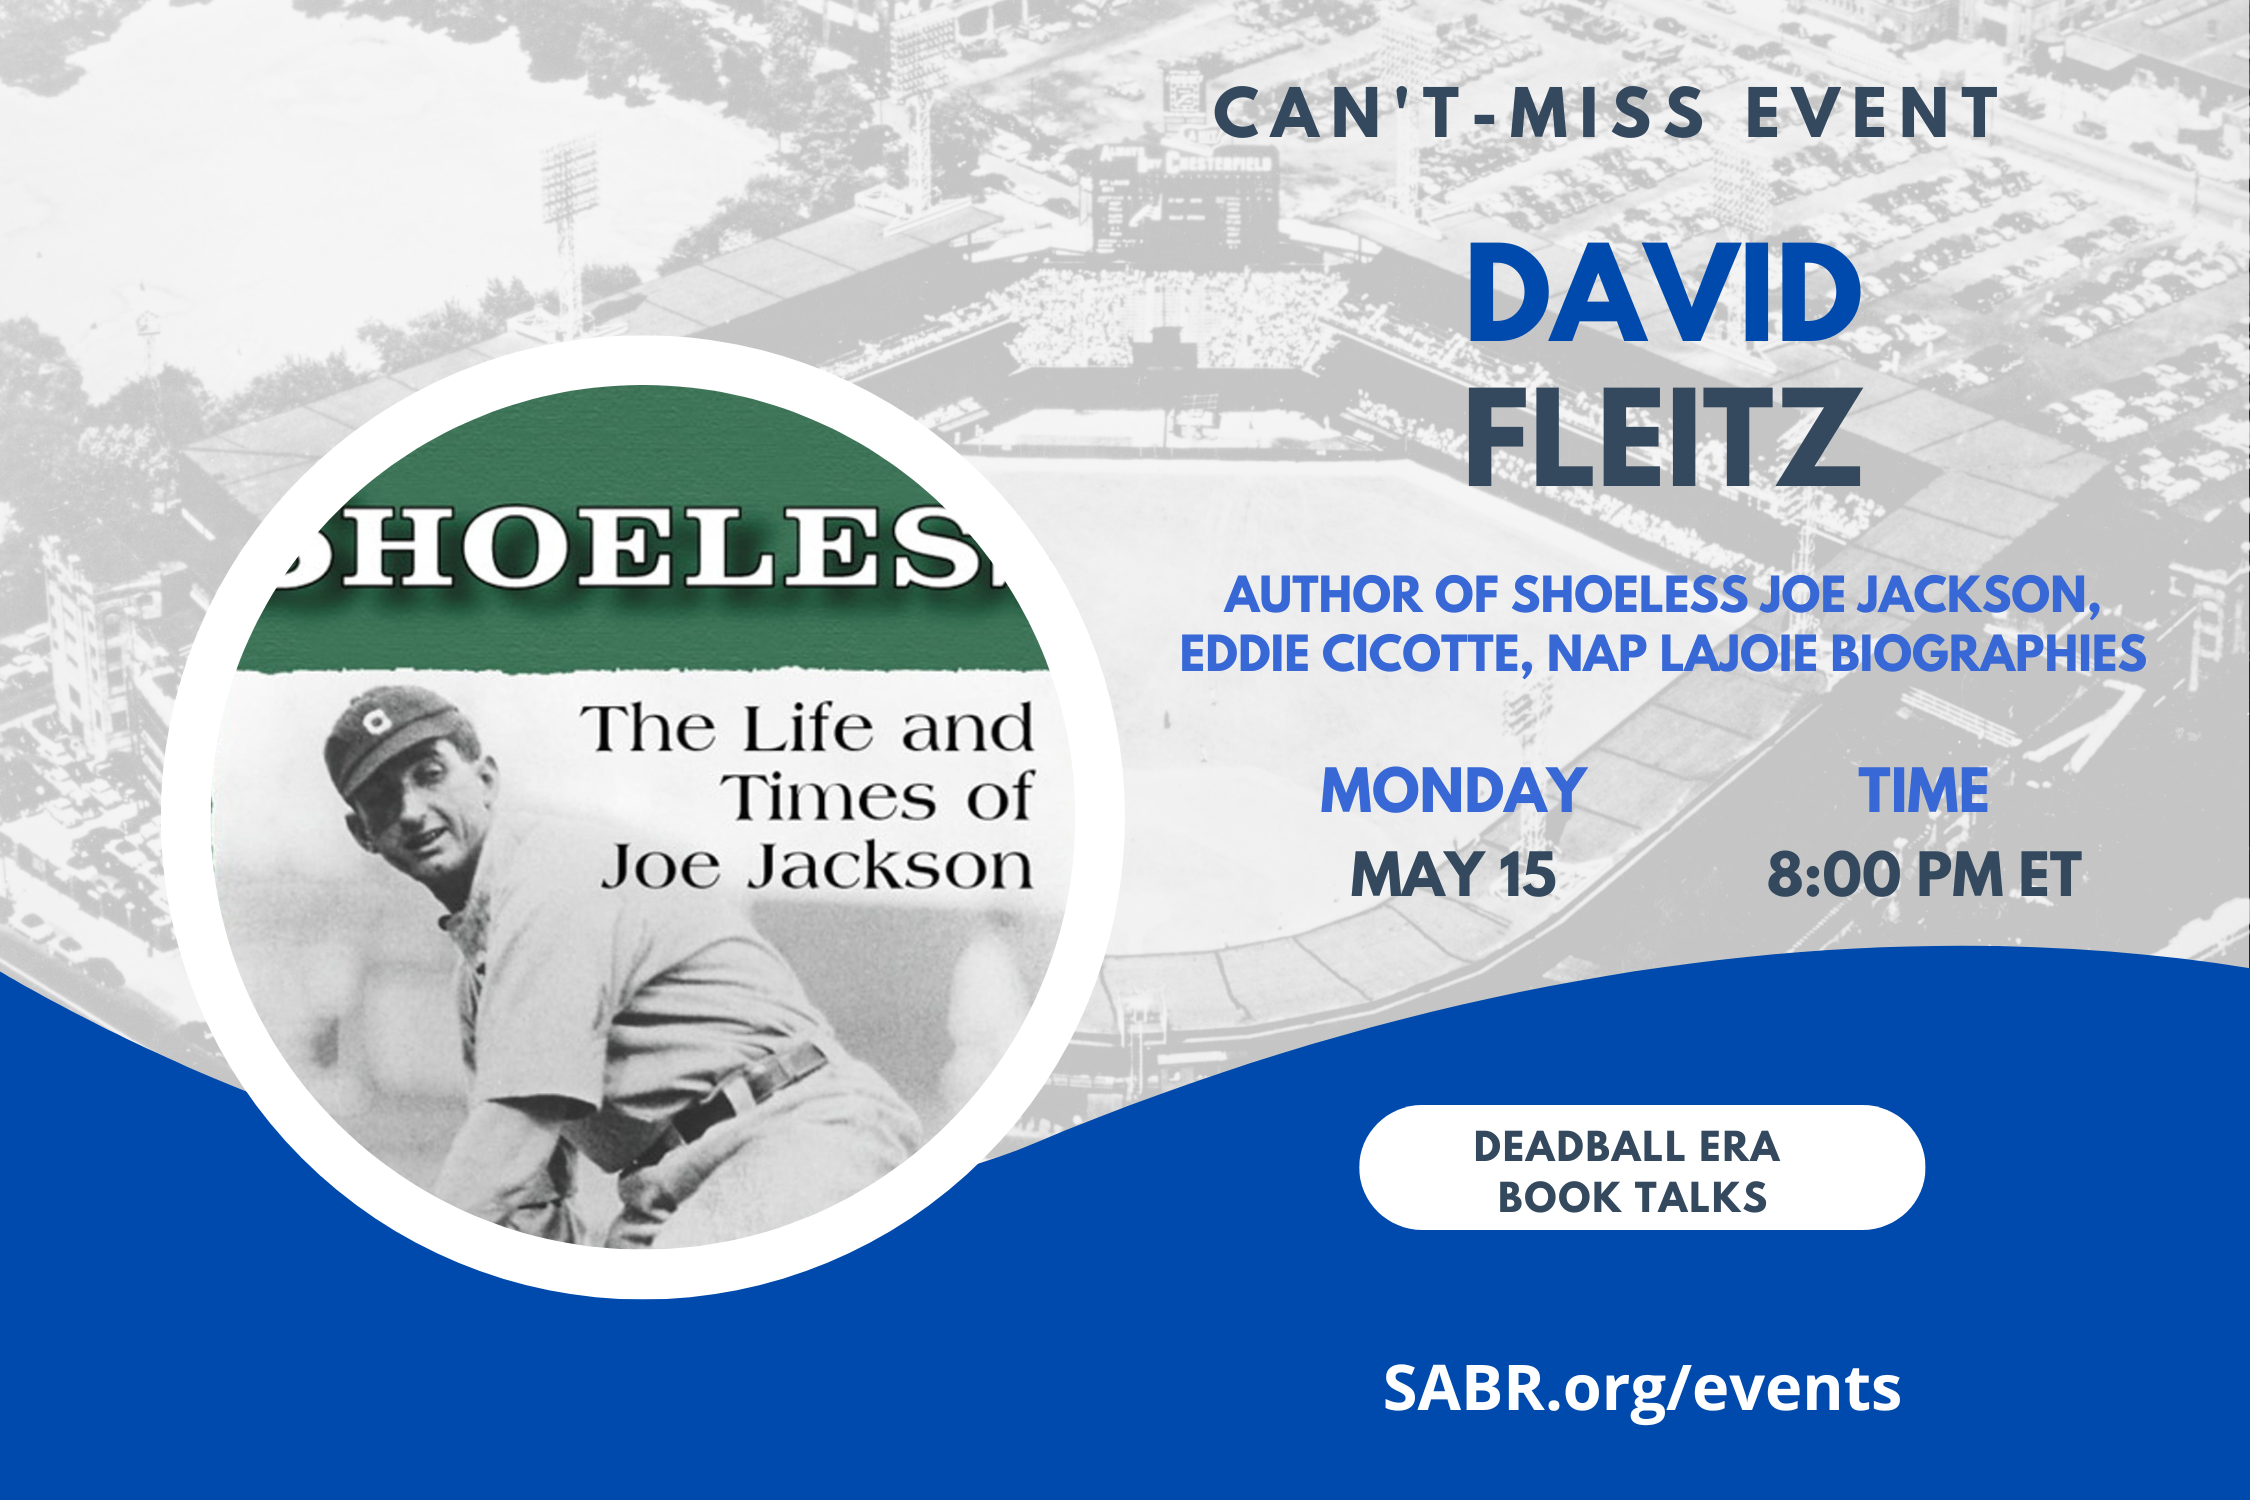 SABR's Deadball Era Committee will host its next Book Talk virtual meeting at 8:00 p.m. EDT on Monday, May 15, 2023. All baseball fans are welcome to attend.

Our guest is David Fleitz, award-winning author of 10 books on baseball history, including biographies of Deadball Era stars Napoleon Lajoie, Shoeless Joe Jackson, and Eddie Cicotte. His newest book, to be published in September 2023, is Schnozz: The Baseball Life of Ernie Lombardi.